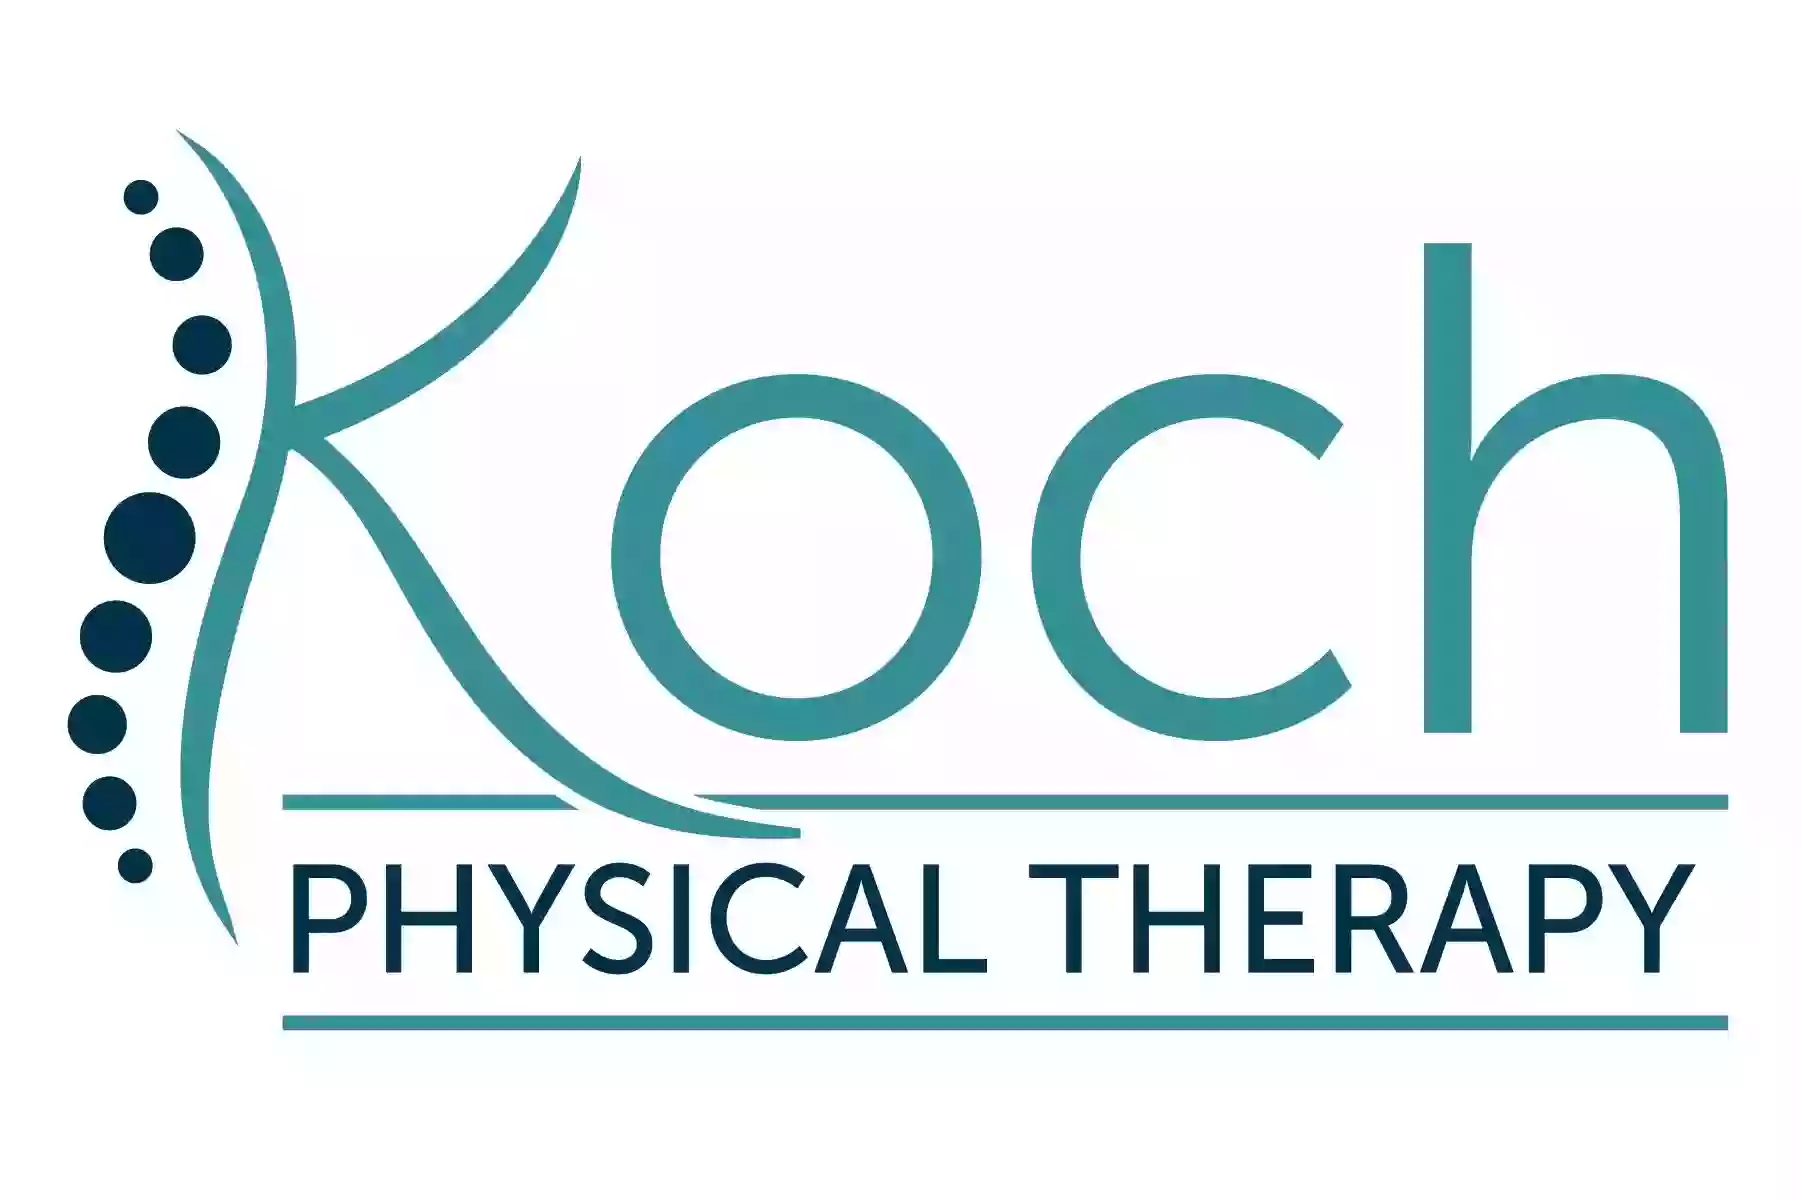 Koch Physical Therapy